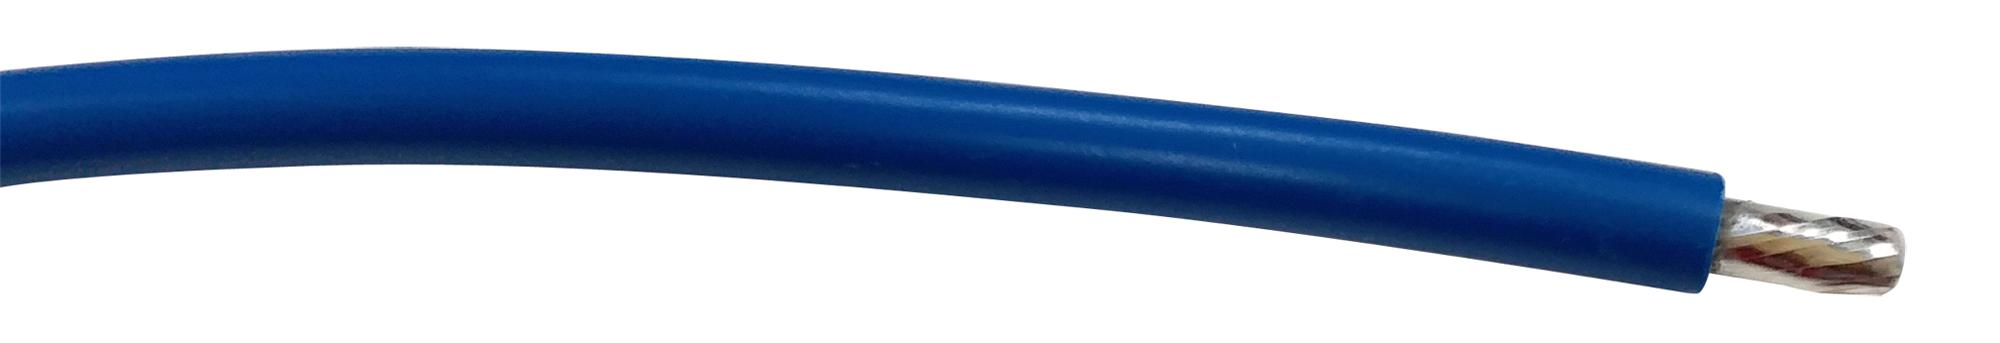 PP002521 CABLE WIRE, 18AWG, BLUE, 305M PRO POWER